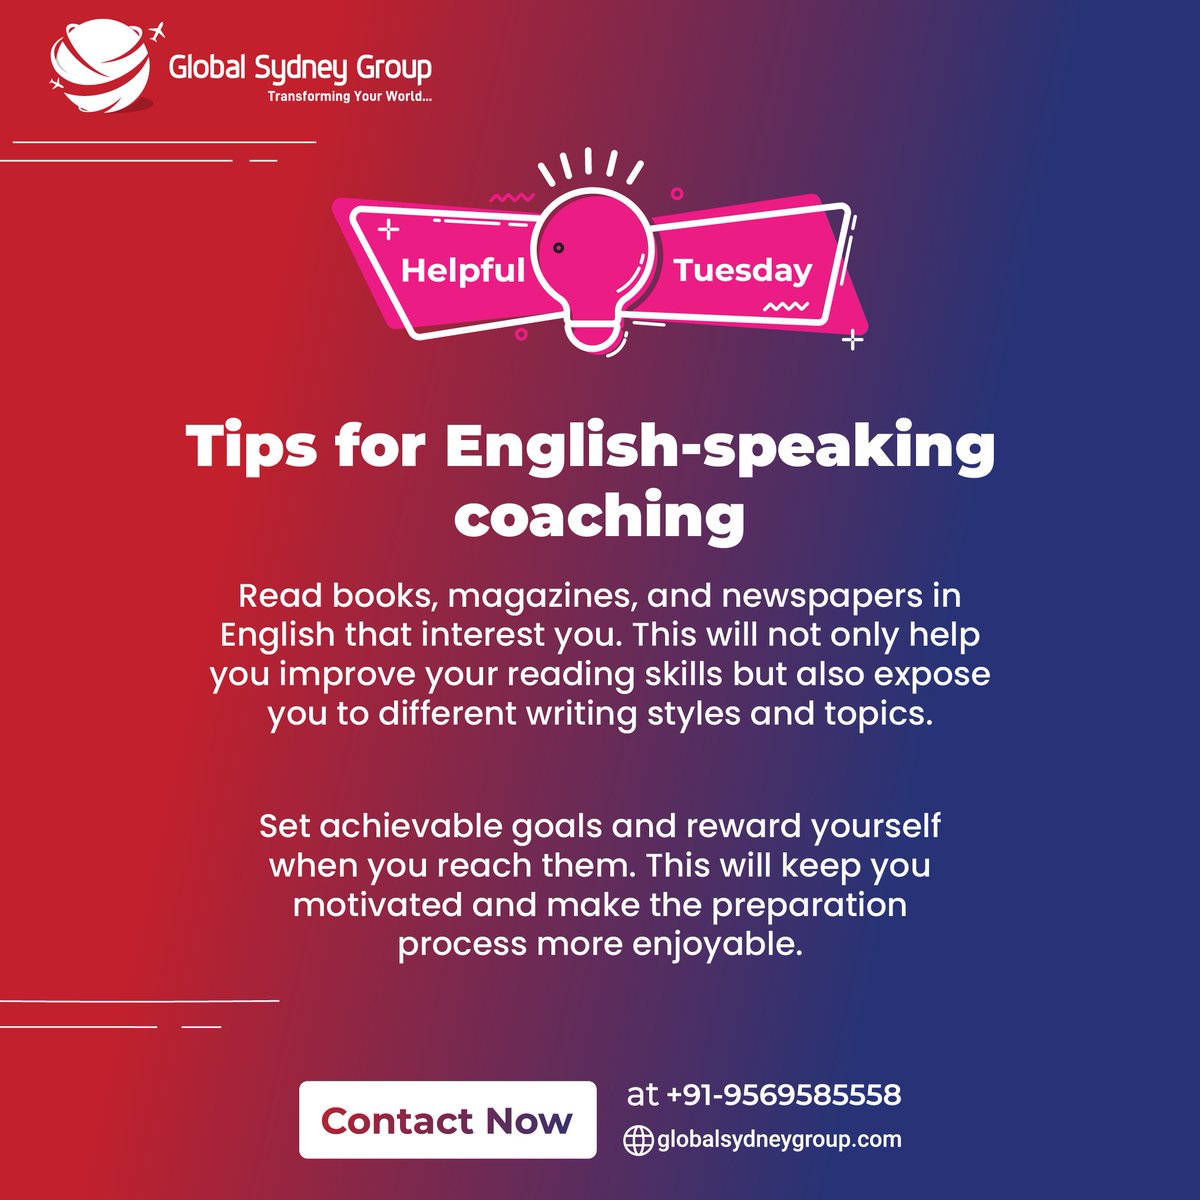 🤩Unlock your English-speaking potential with our expert tips and tricks! Let's succeed together!💯
.
.
.
.
.

#globalsydneygroup #HELPFULTUESDAY
#teamgsg #bestieltscoaching #ieltsinchandigarh #ptecoaching #studyabroad #studyvisa #bestimmigrationconsultant